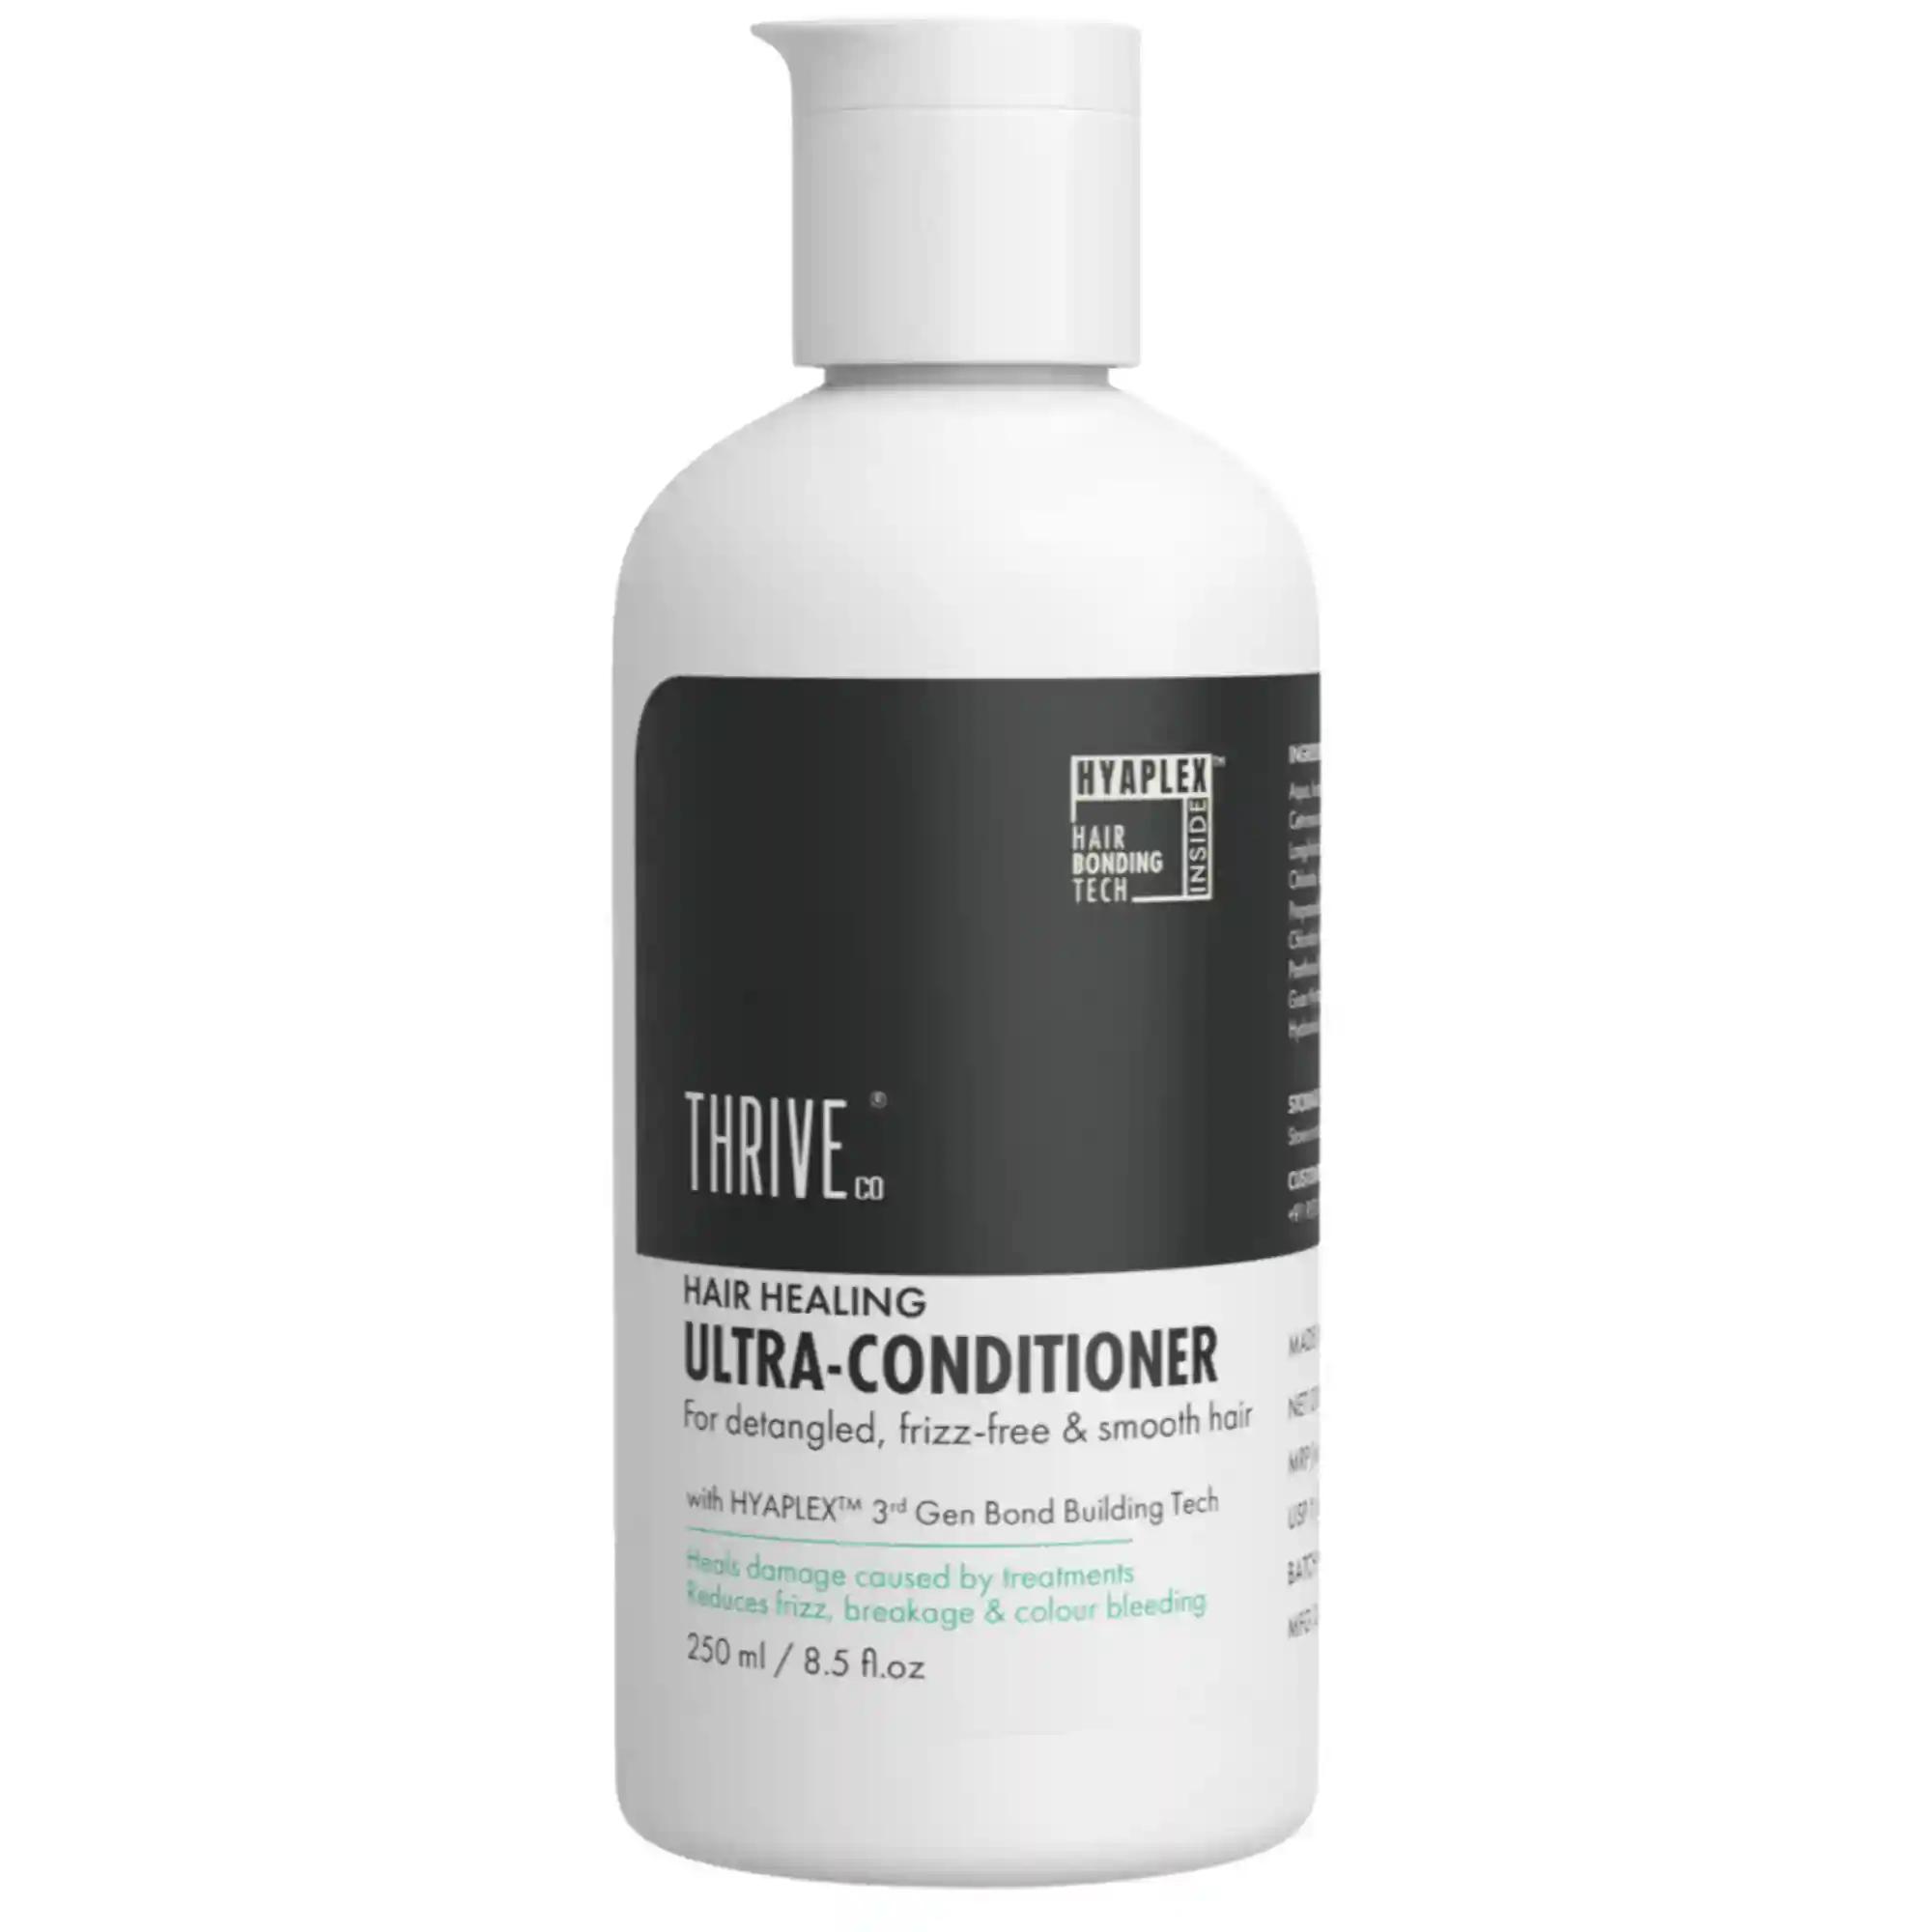 ThriveCo Hair Healing Conditioner, 250ml